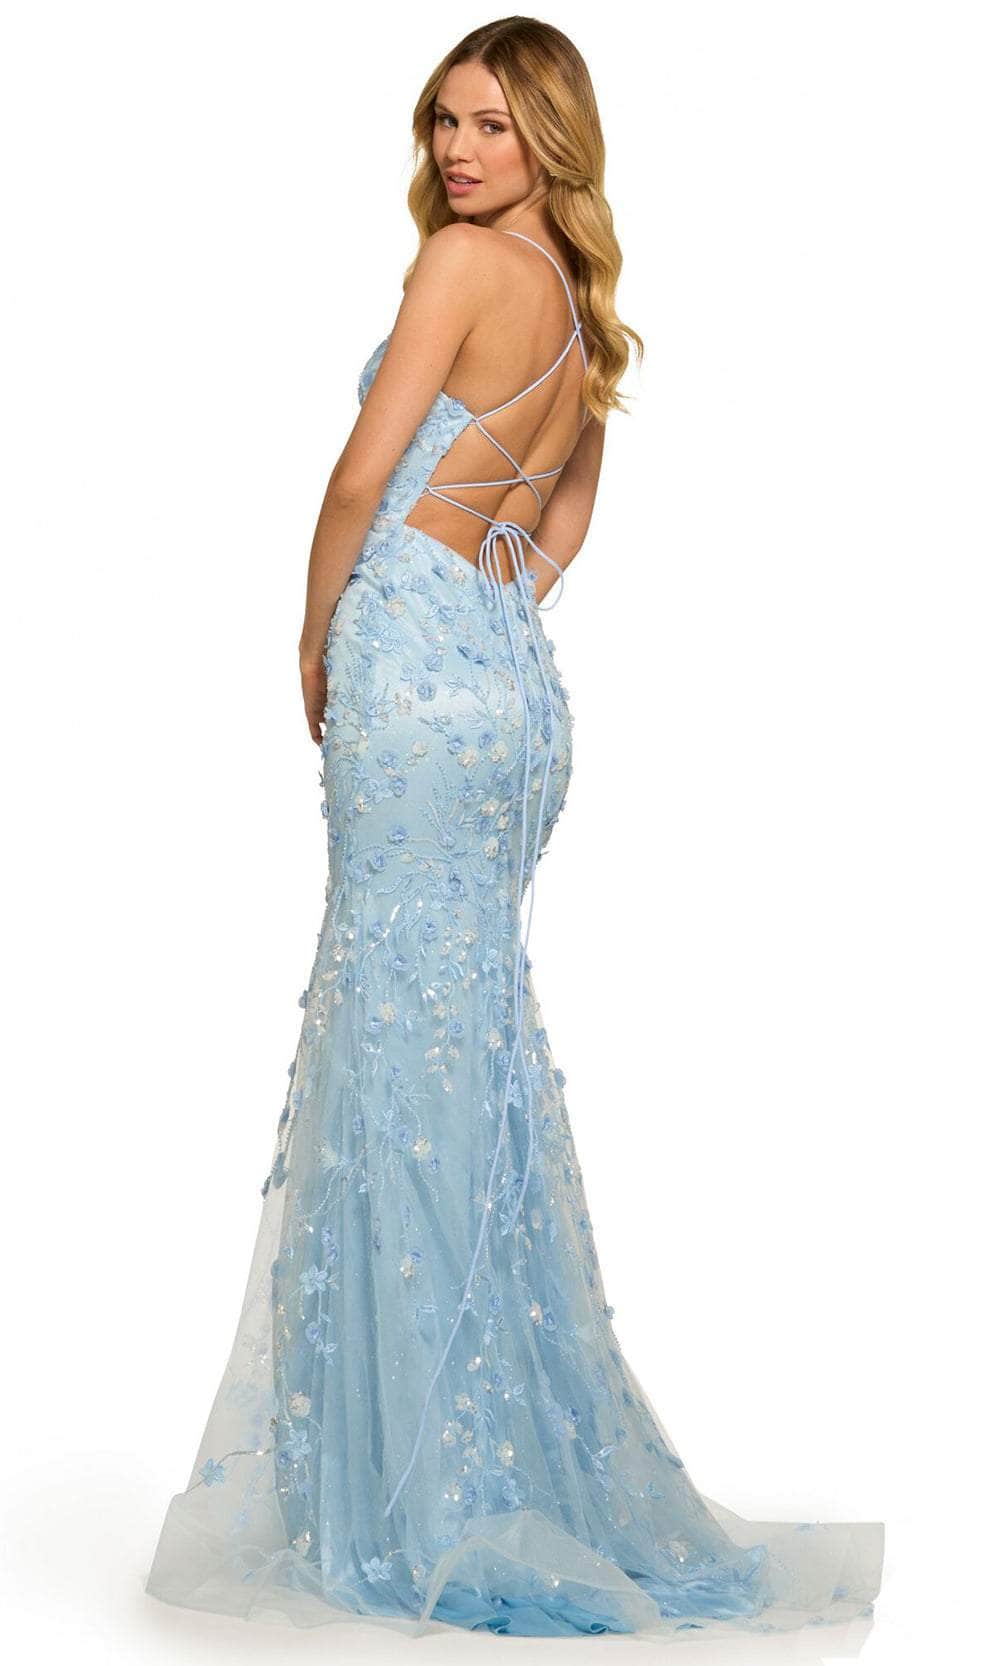 Sherri Hill, Sherri Hill 55531 - Thin Strapped Floral Patterned Long Gown